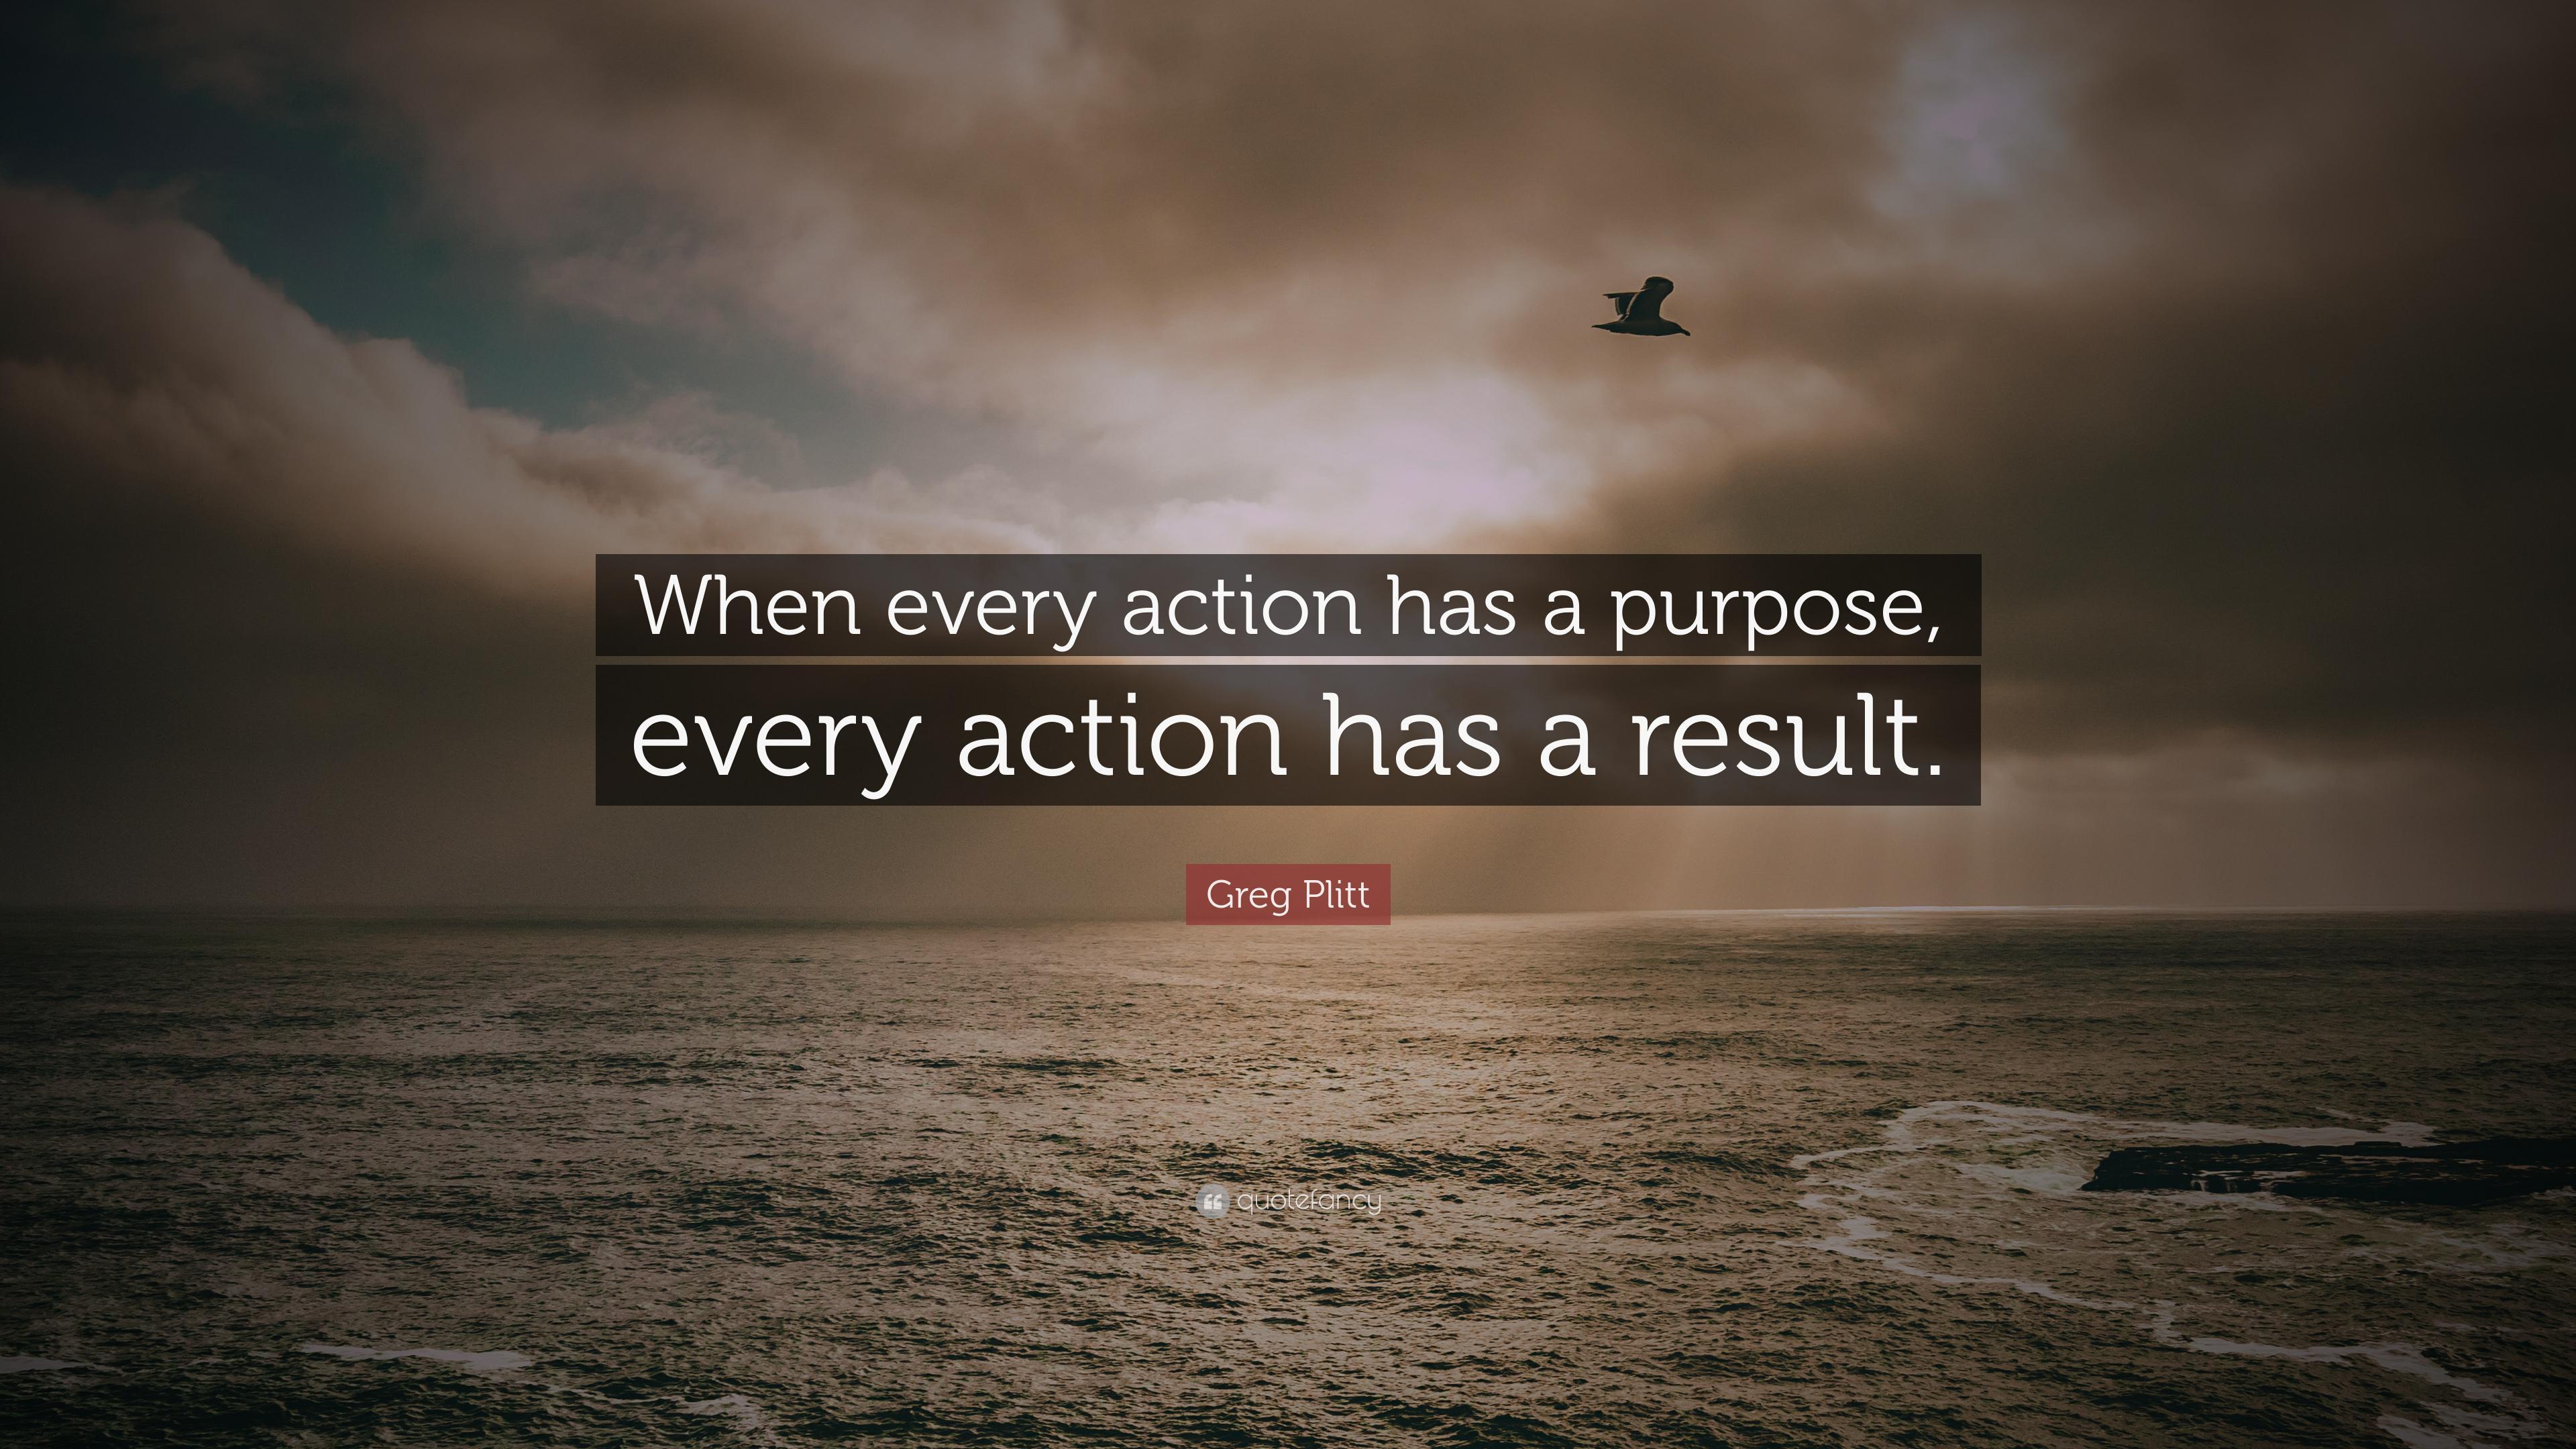 Greg Plitt Quote: “When every action has a purpose, every action has